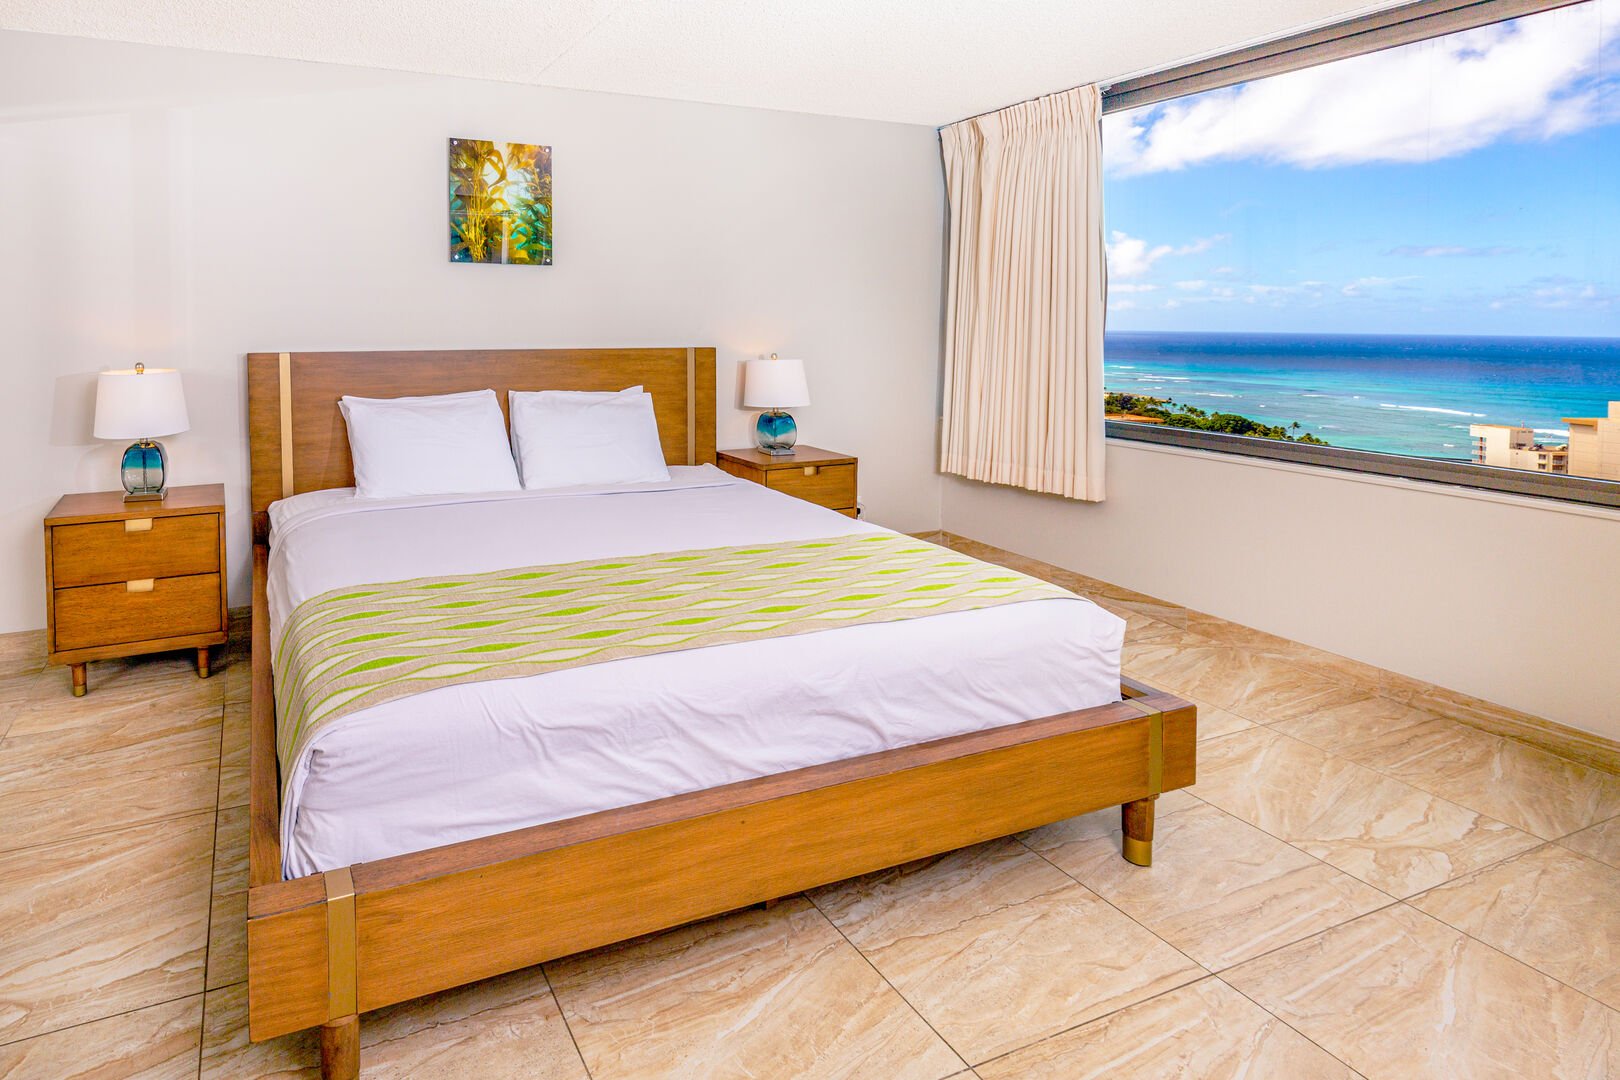 Bedroom with king size bed, tow night stands and ocean view